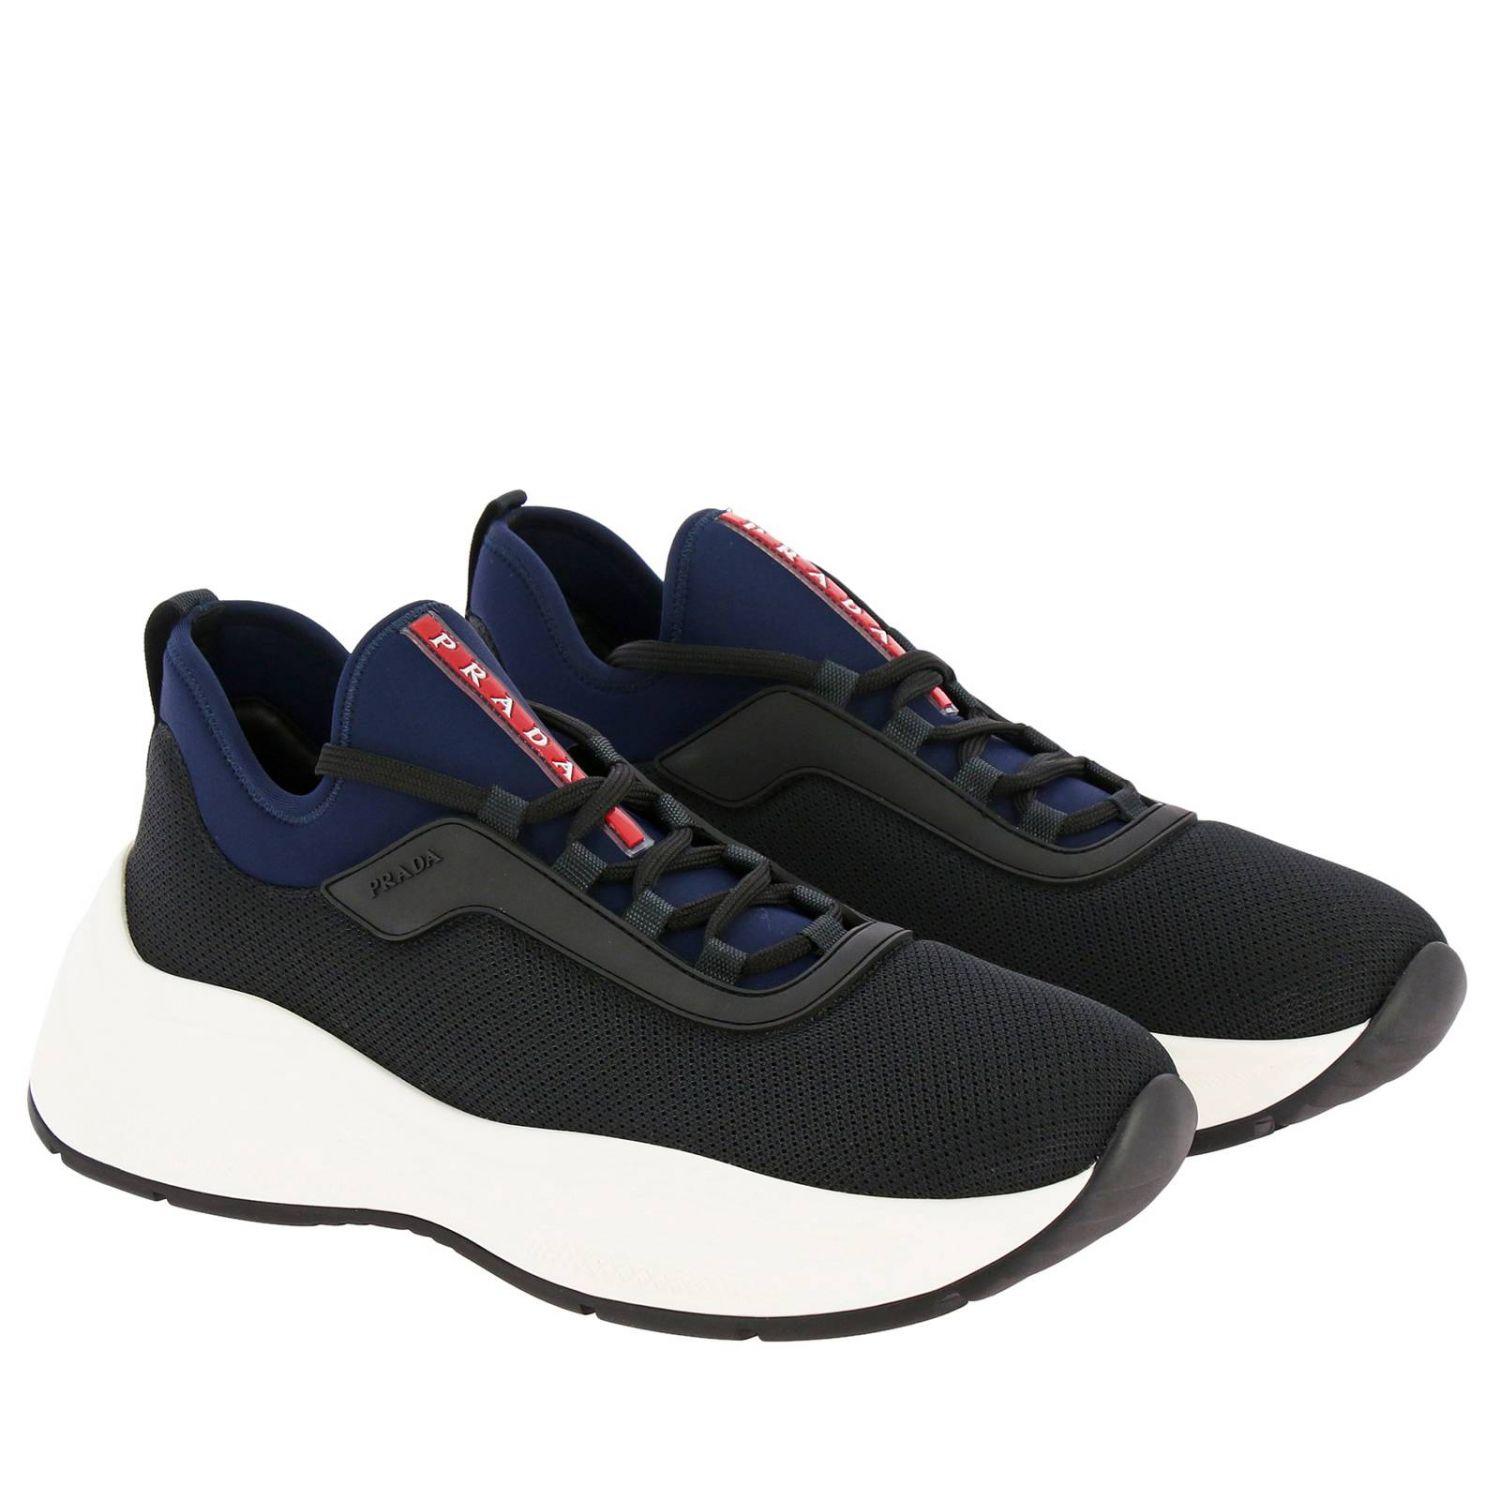 Prada Synthetic Sneakers Barca Xl In Technical Fabric And Neoprene With ...